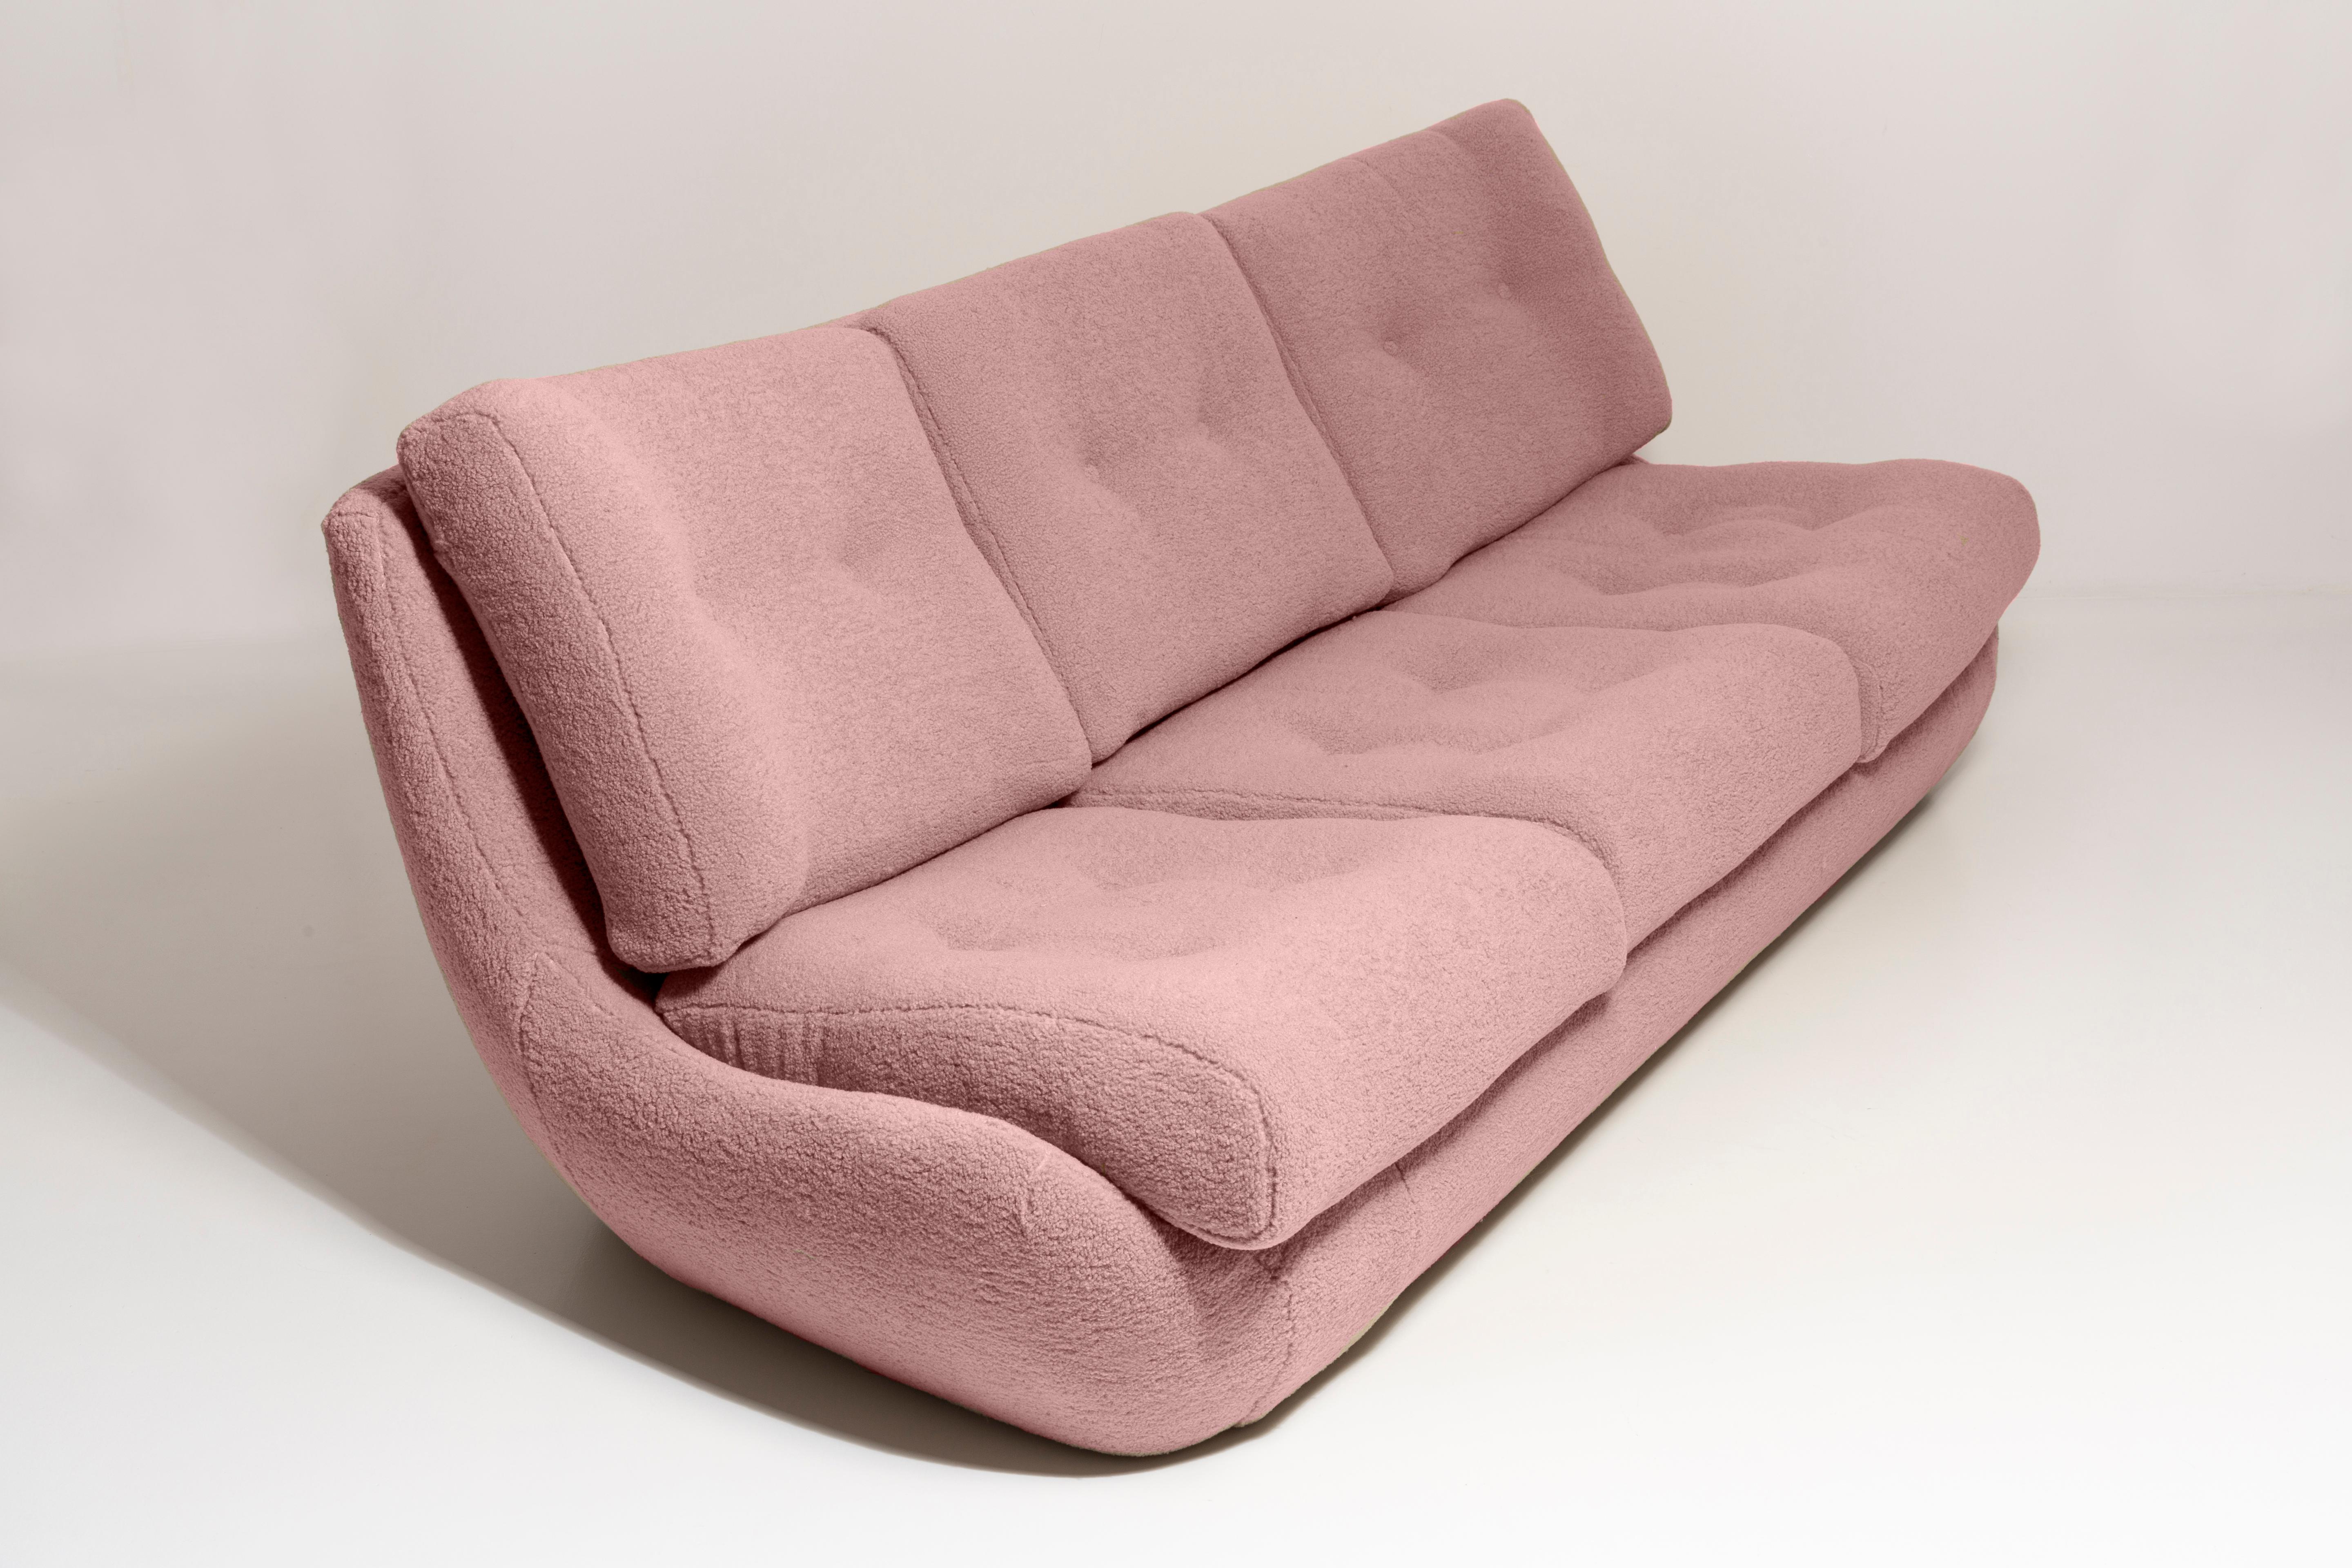 Pink Blush Boucle Atlantis Sofa and Armchairs, Europe, 1960s For Sale 1